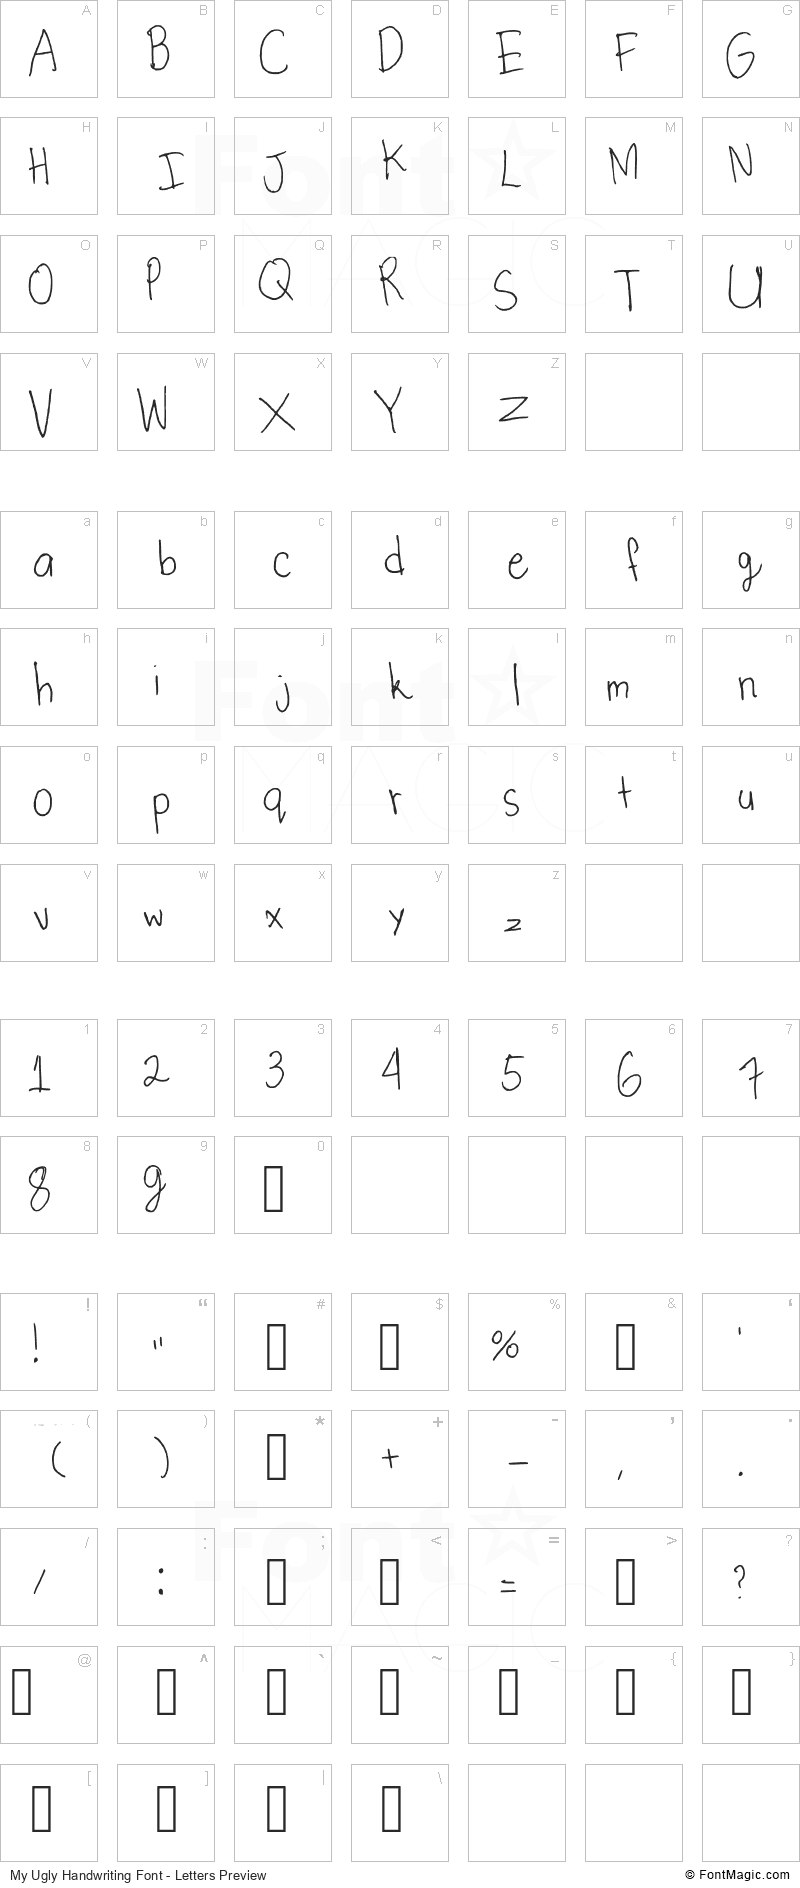 My Ugly Handwriting Font - All Latters Preview Chart